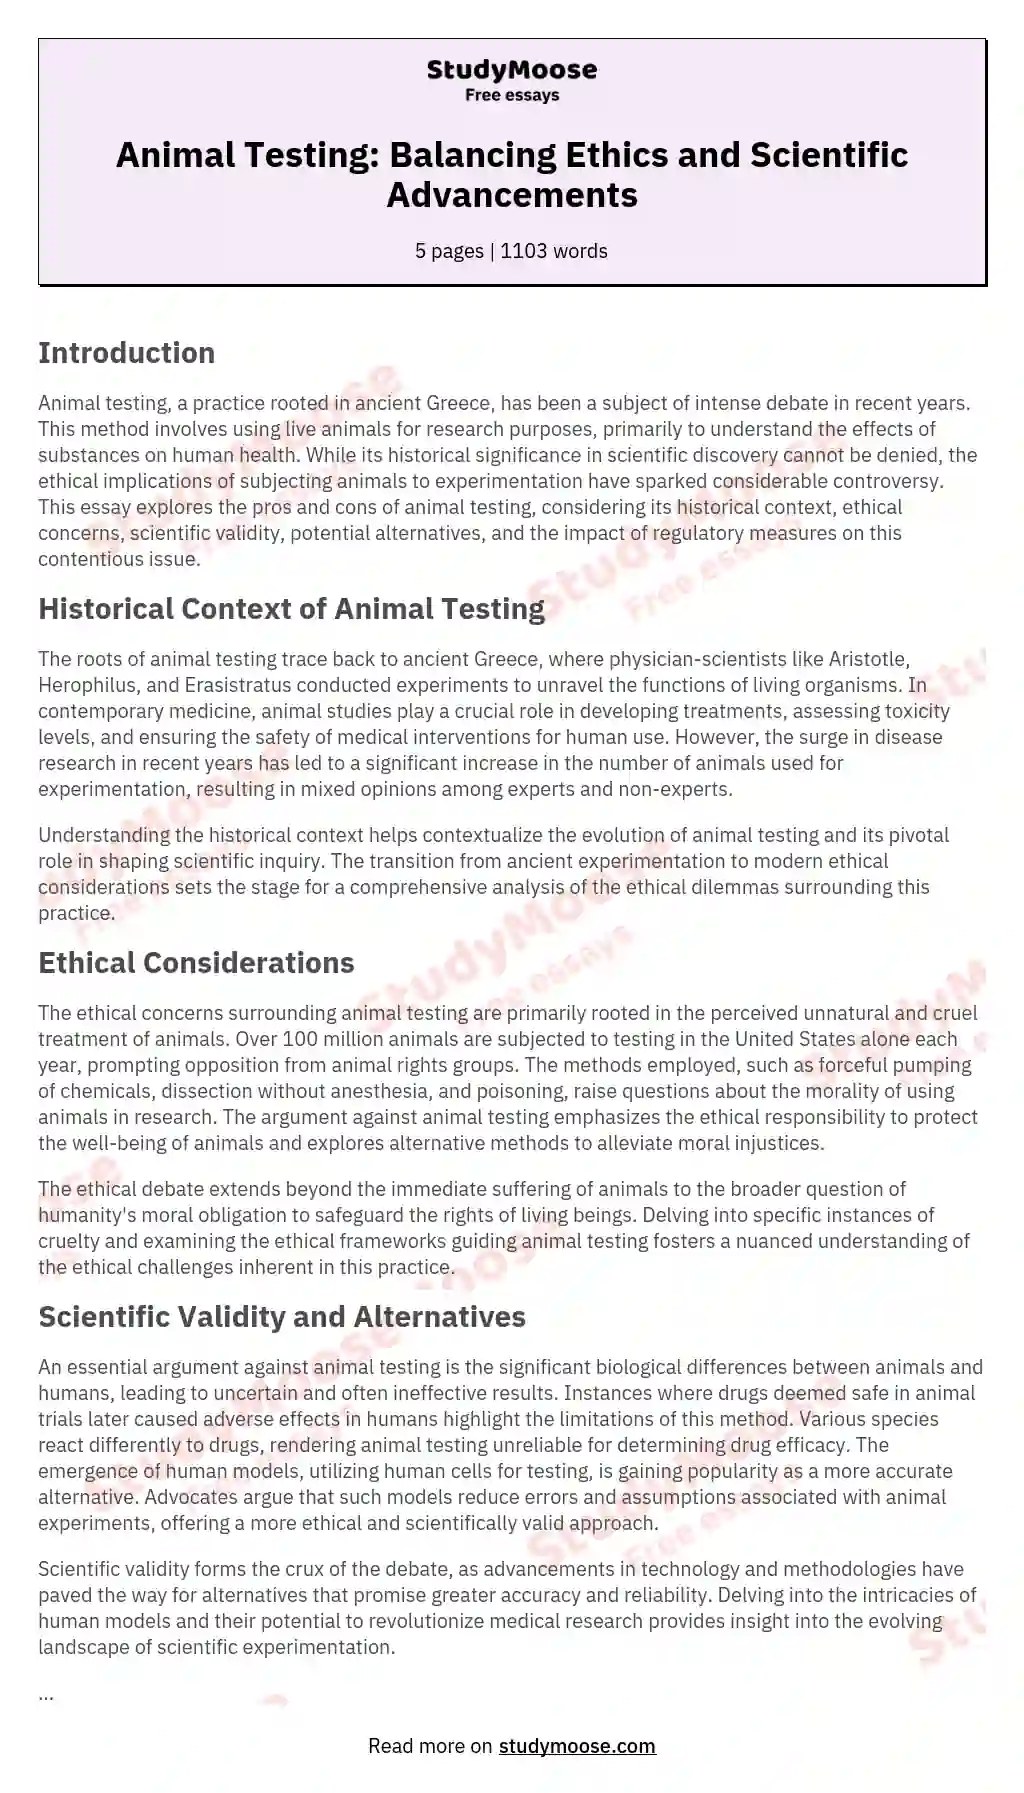 Animal Testing: Balancing Ethics and Scientific Advancements essay